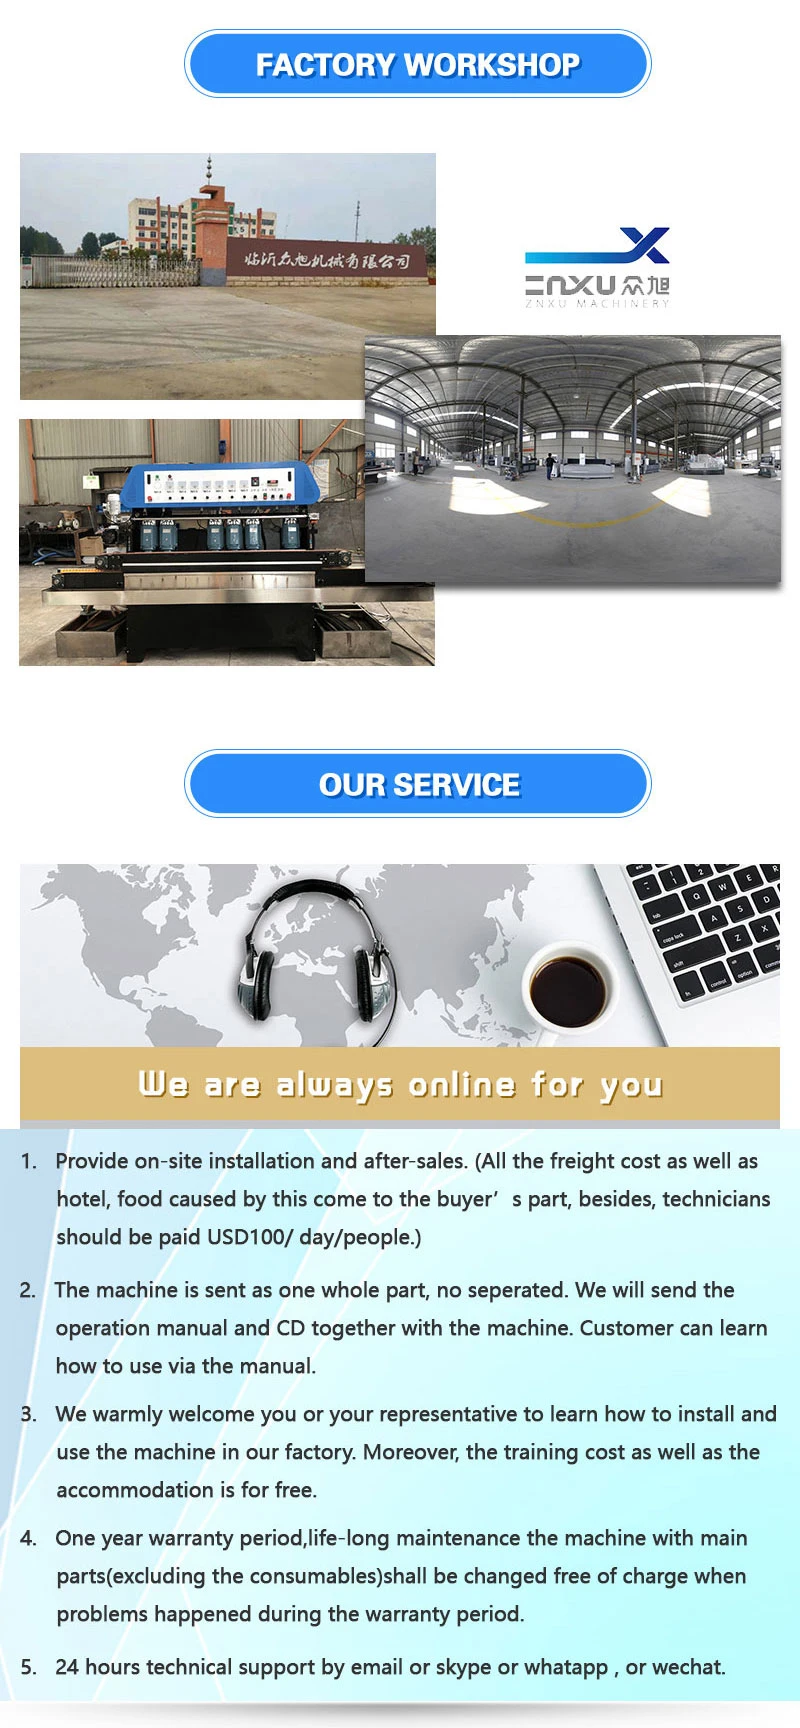 China Supplier Grinding and Polishing Glass Machinery